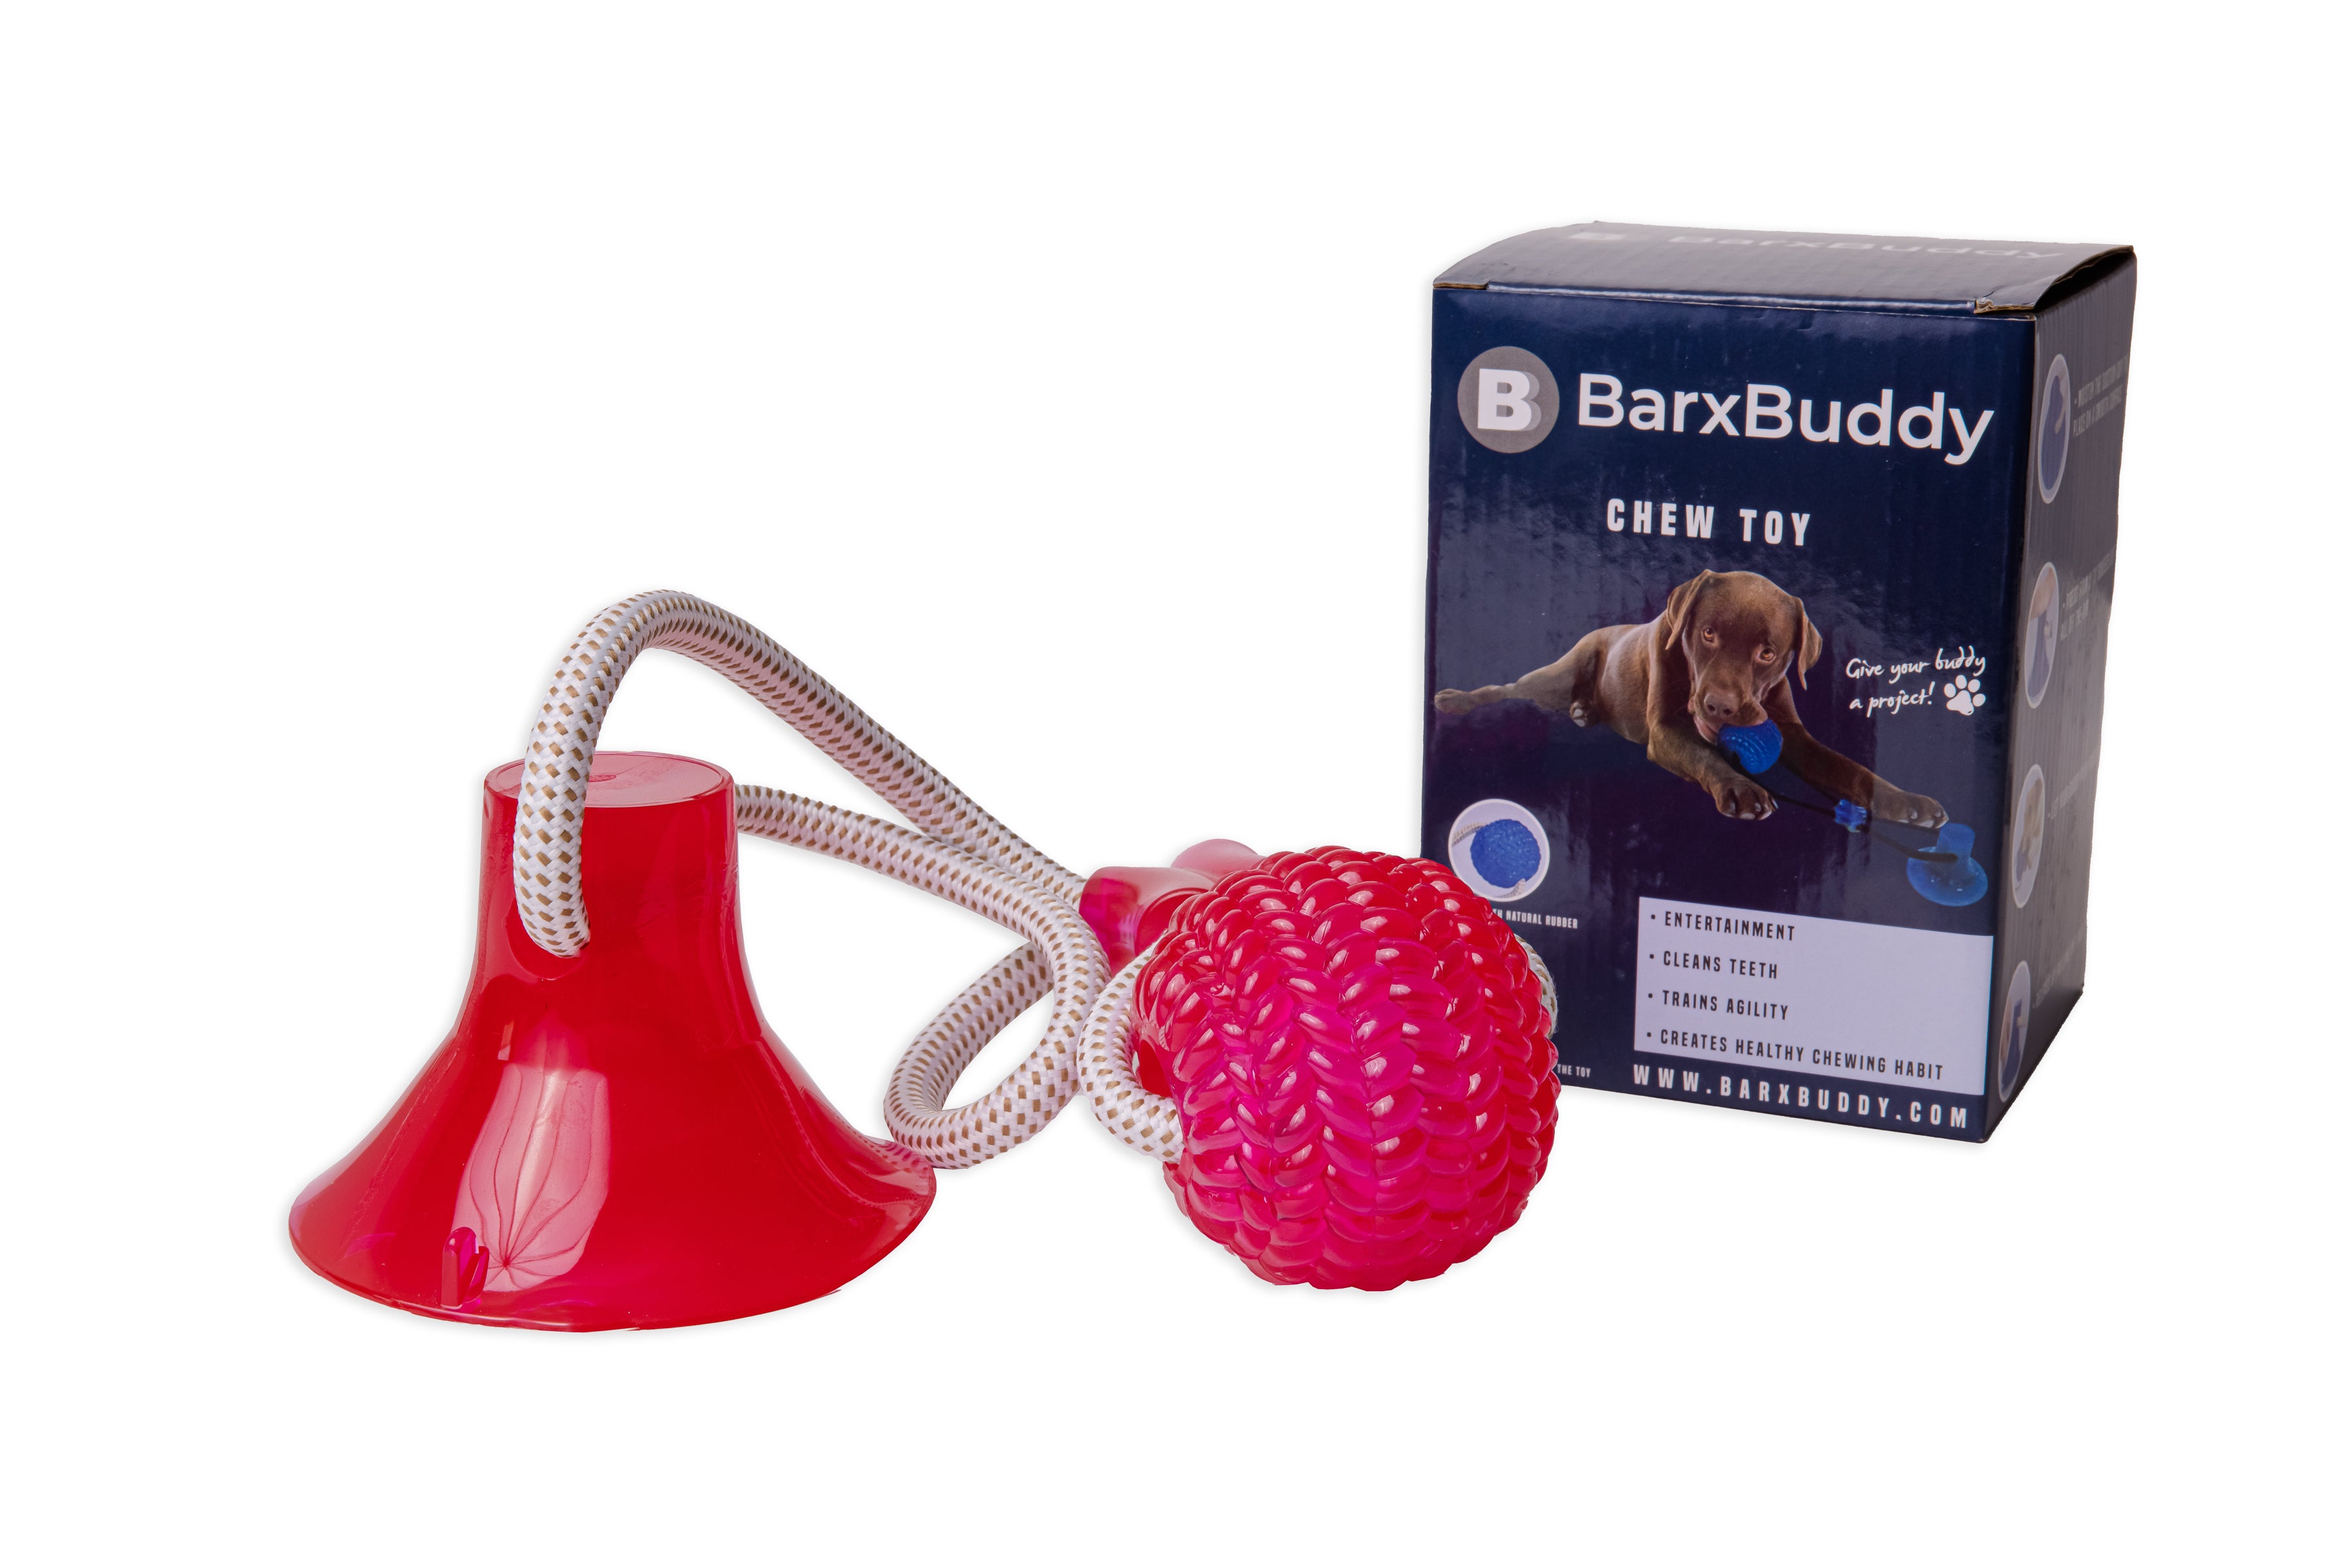 Dog Tug Toy with Suction Cup - Worth Buy Store